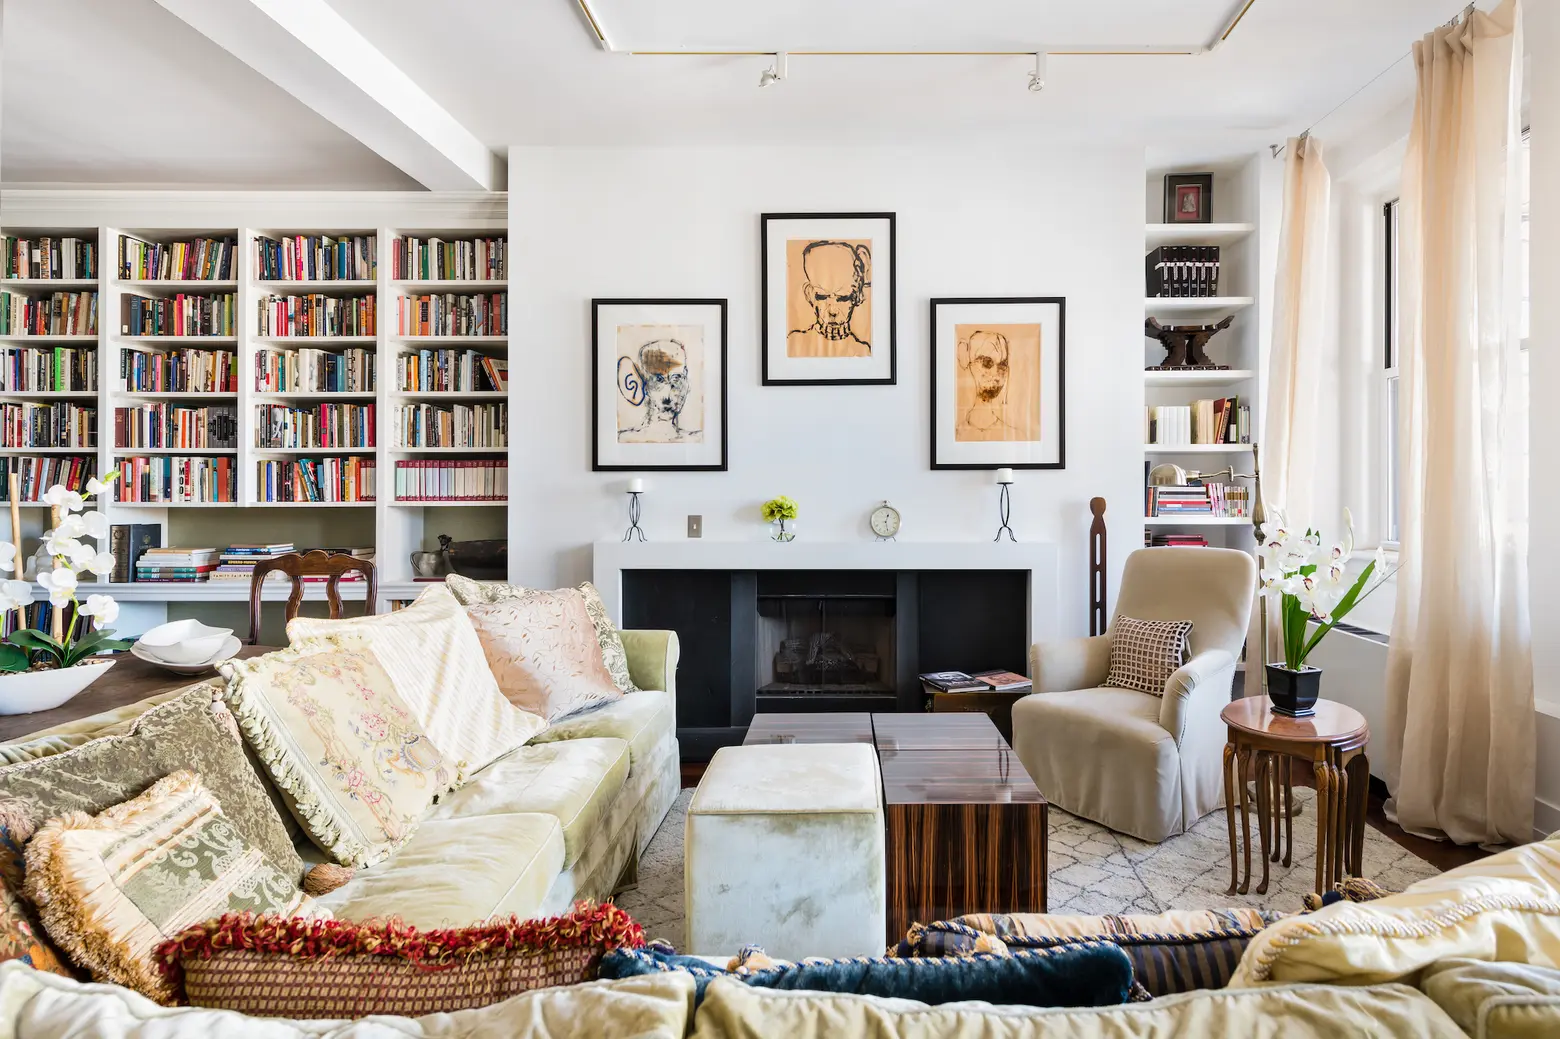 Lovely Tribeca loft of the late Toni Morrison lists for $4.75M